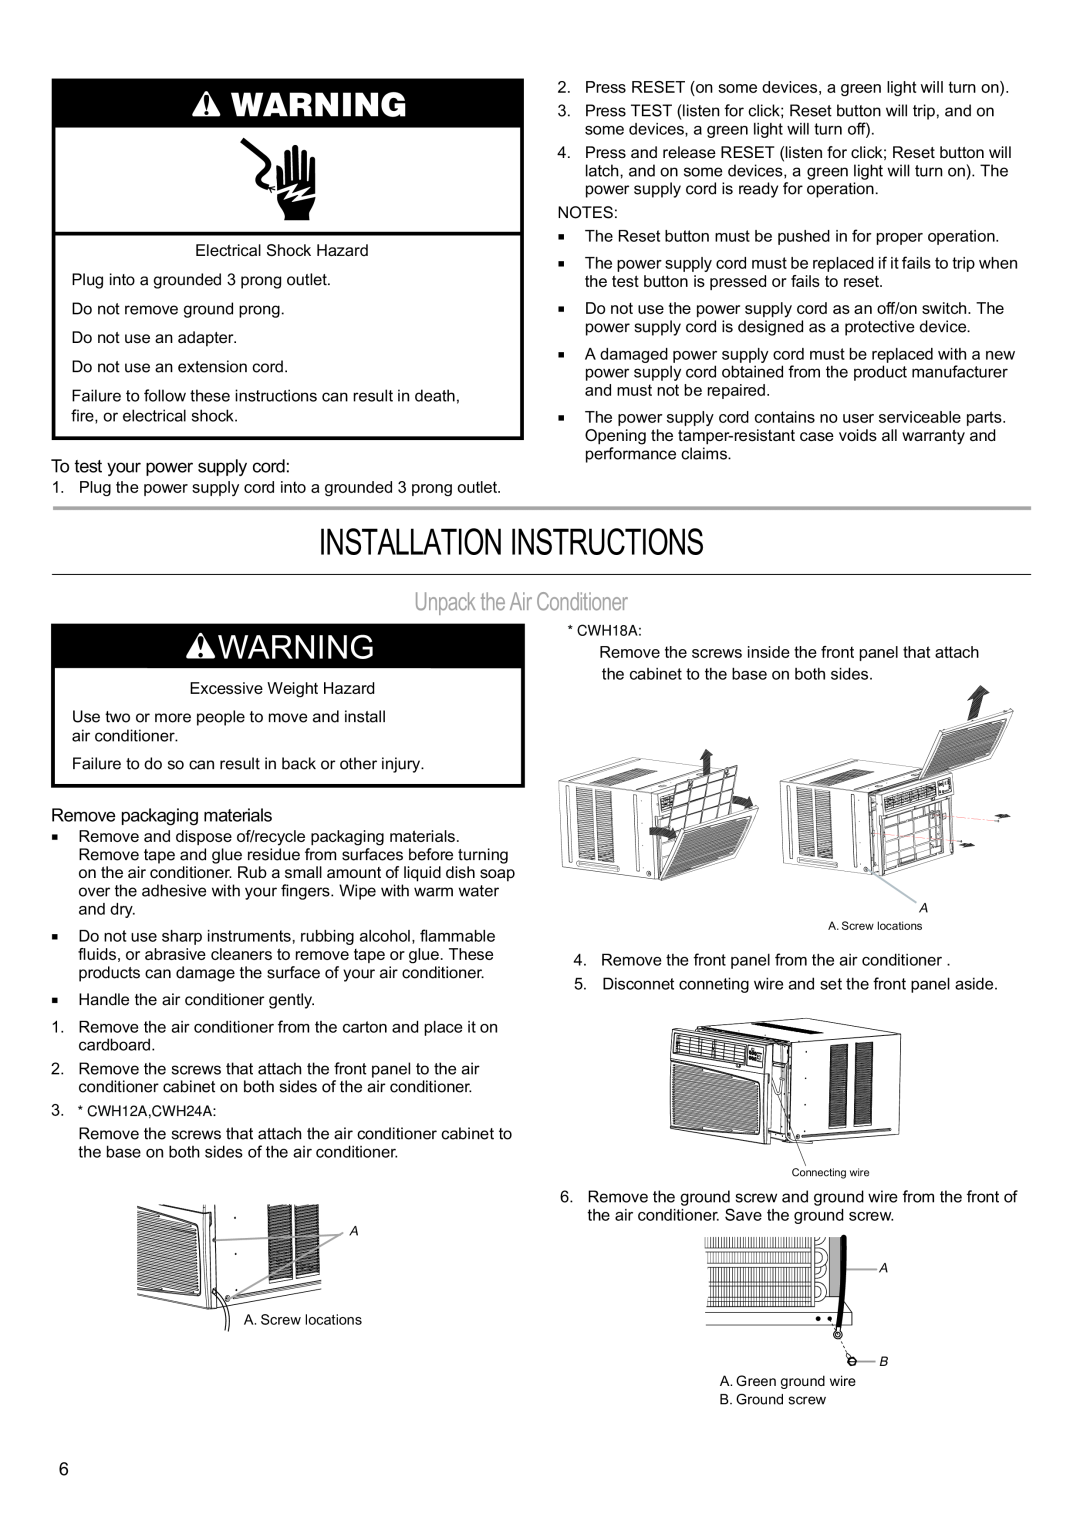 Haier CWH18A, CWH12A, CWH24A manual Installation Instructions, Unpack the Air Conditioner, To test your power supply cord 